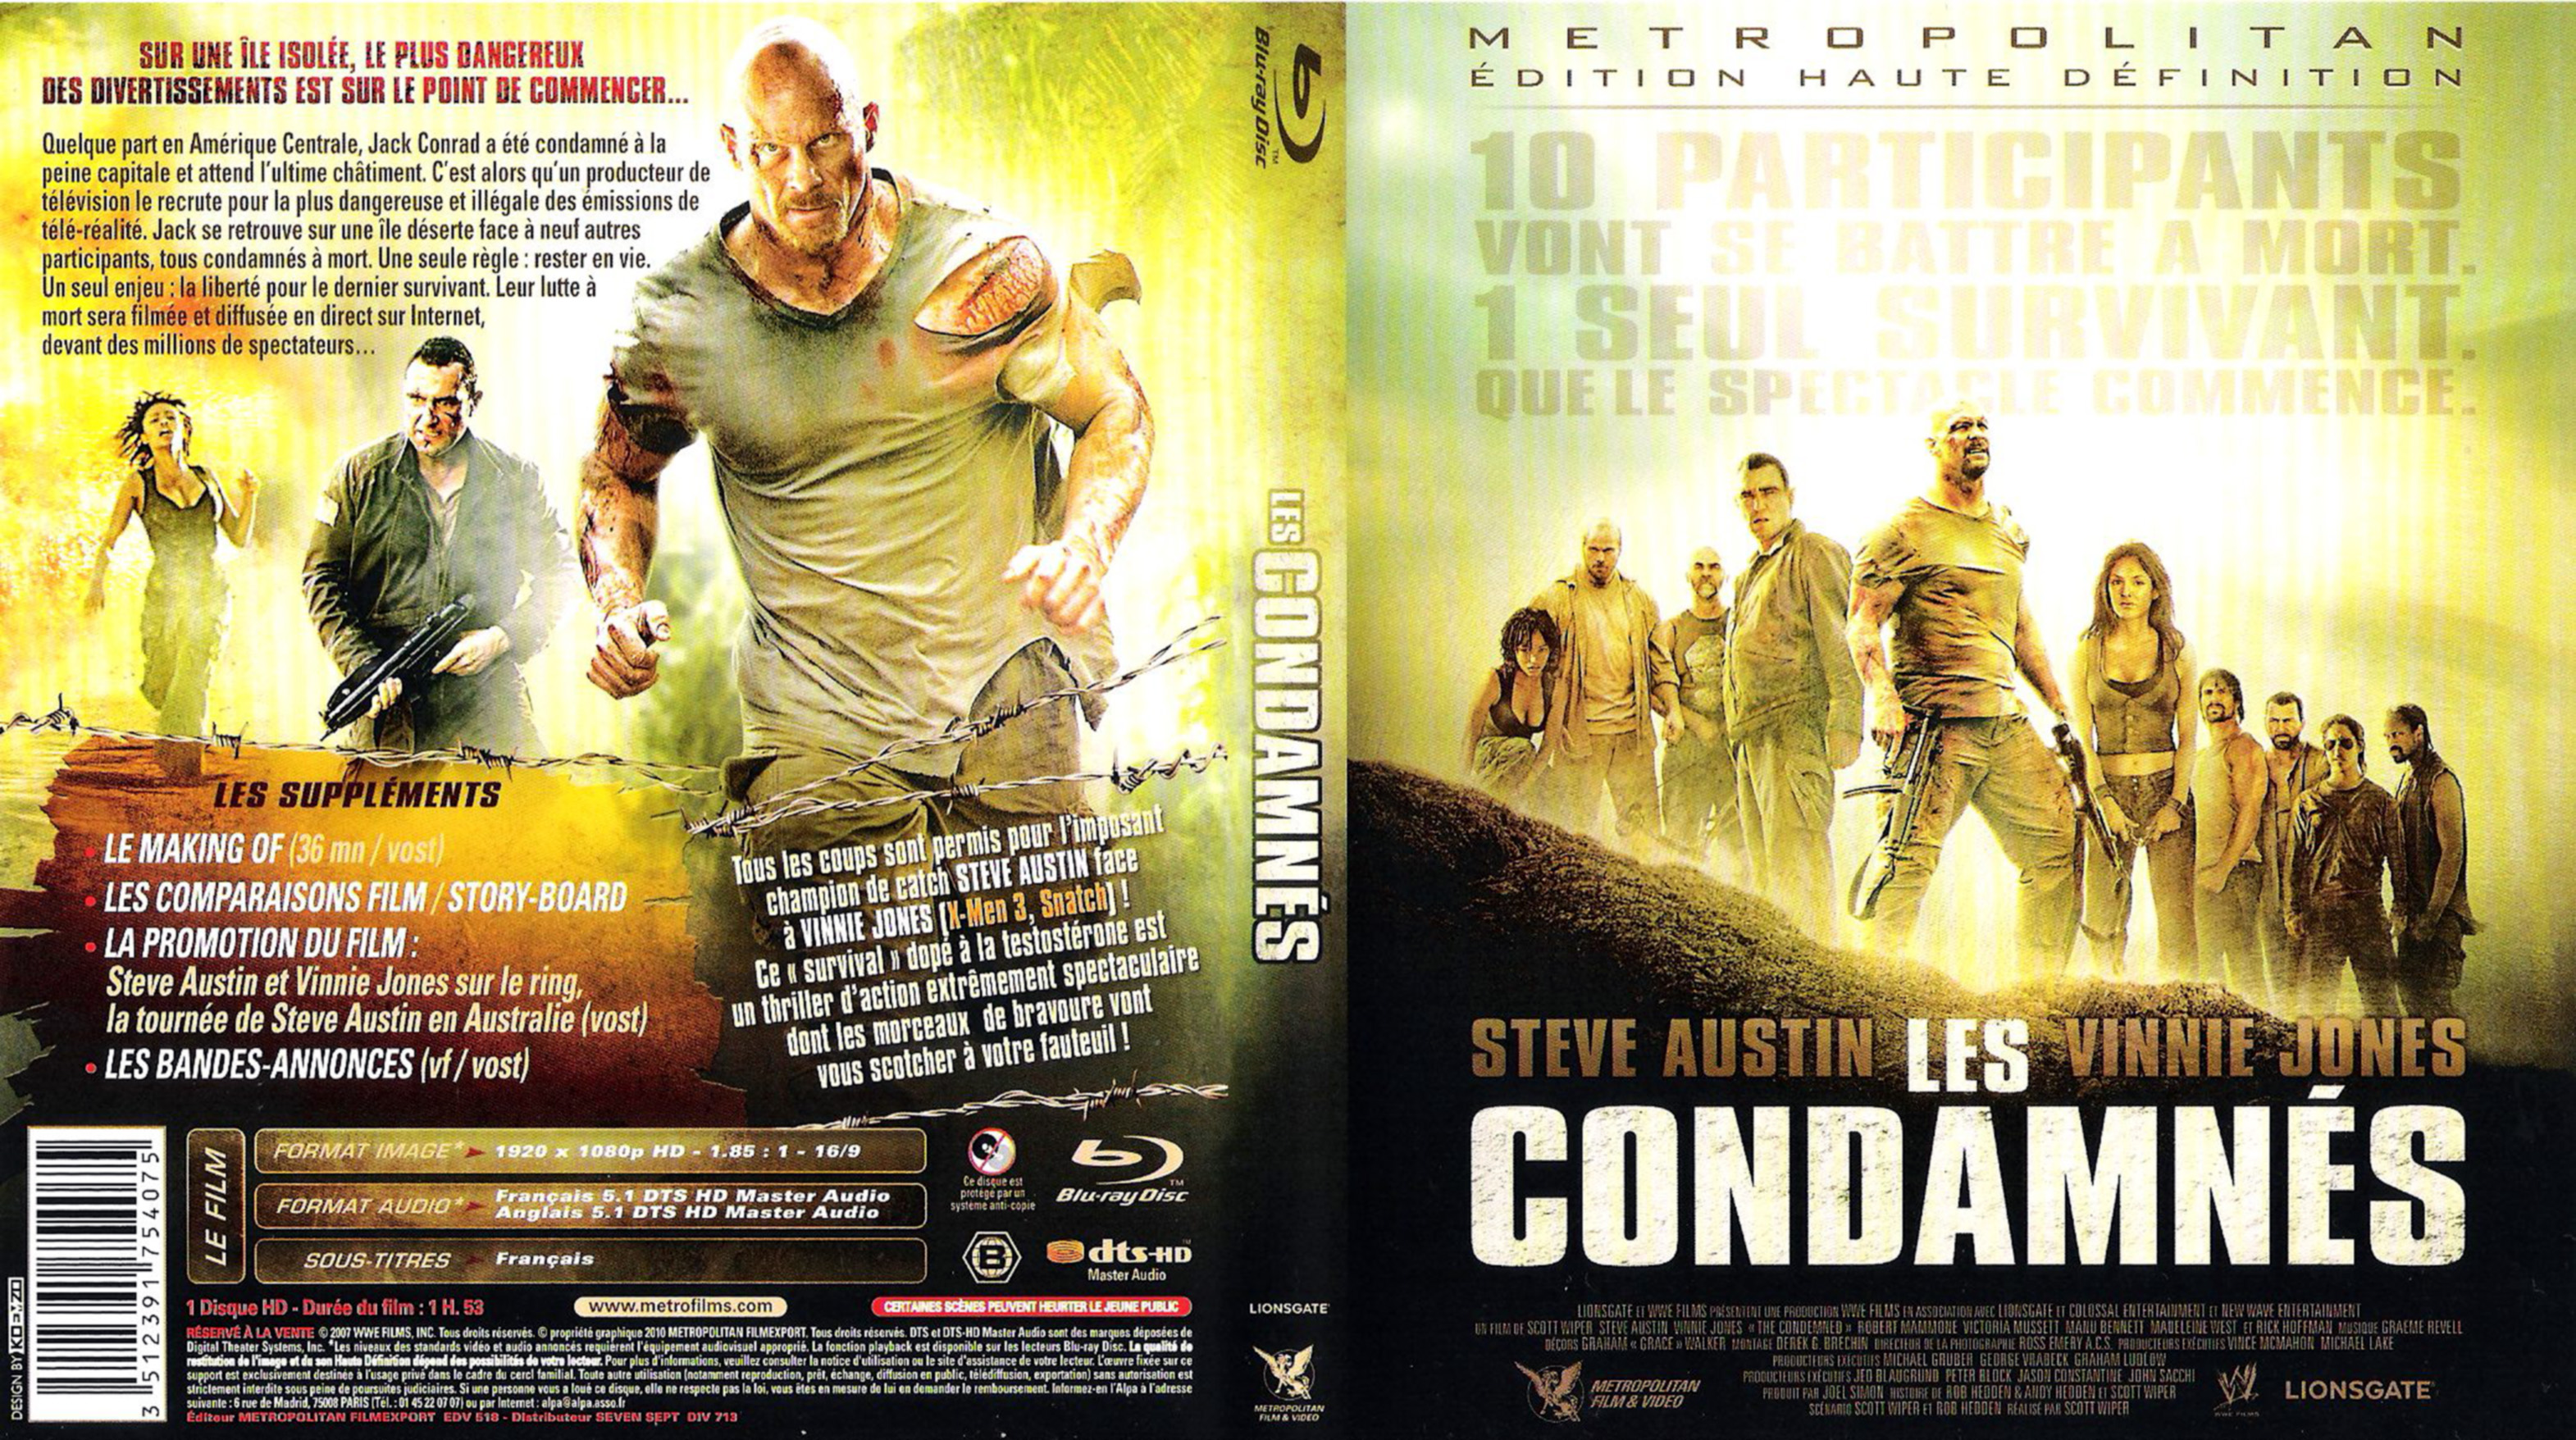 Jaquette DVD Les condamns (BLU-RAY)